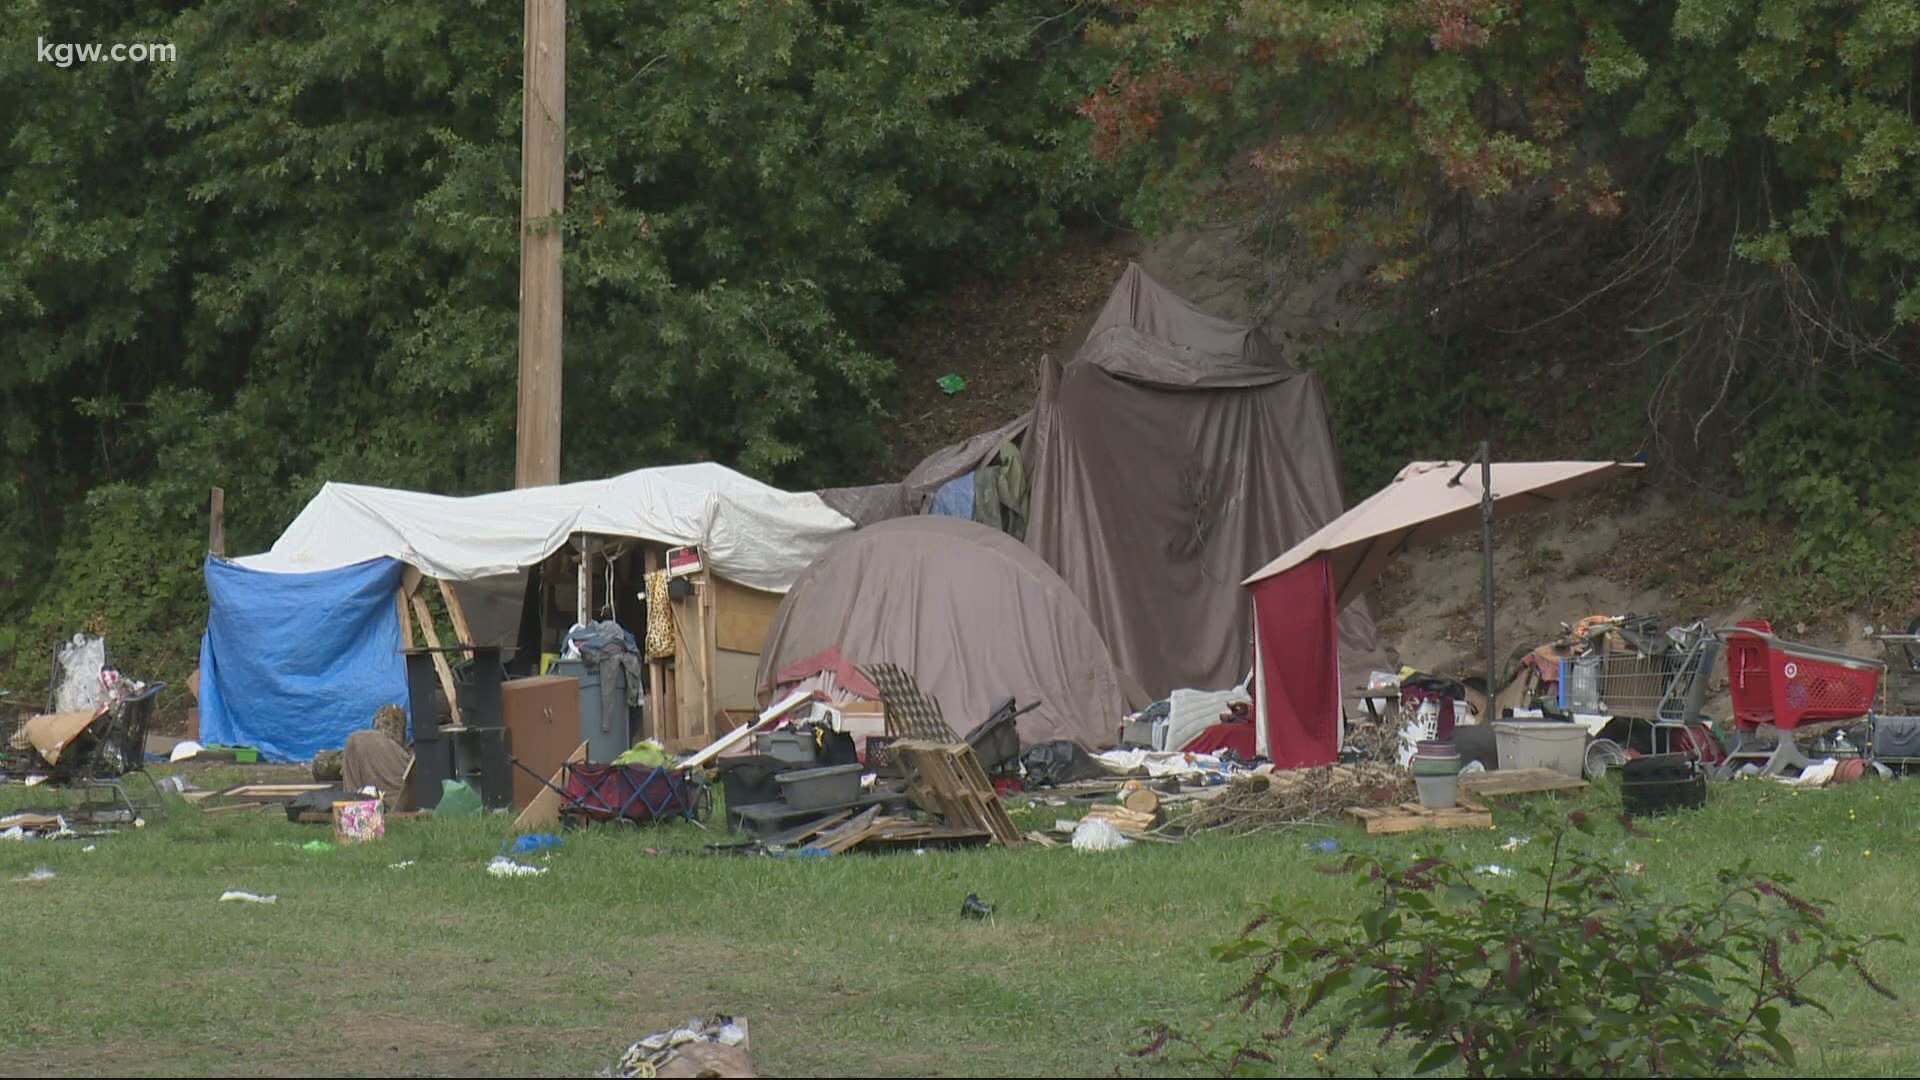 Let’s take a look at the homeless camp presence at Delta Park now and from the archives.